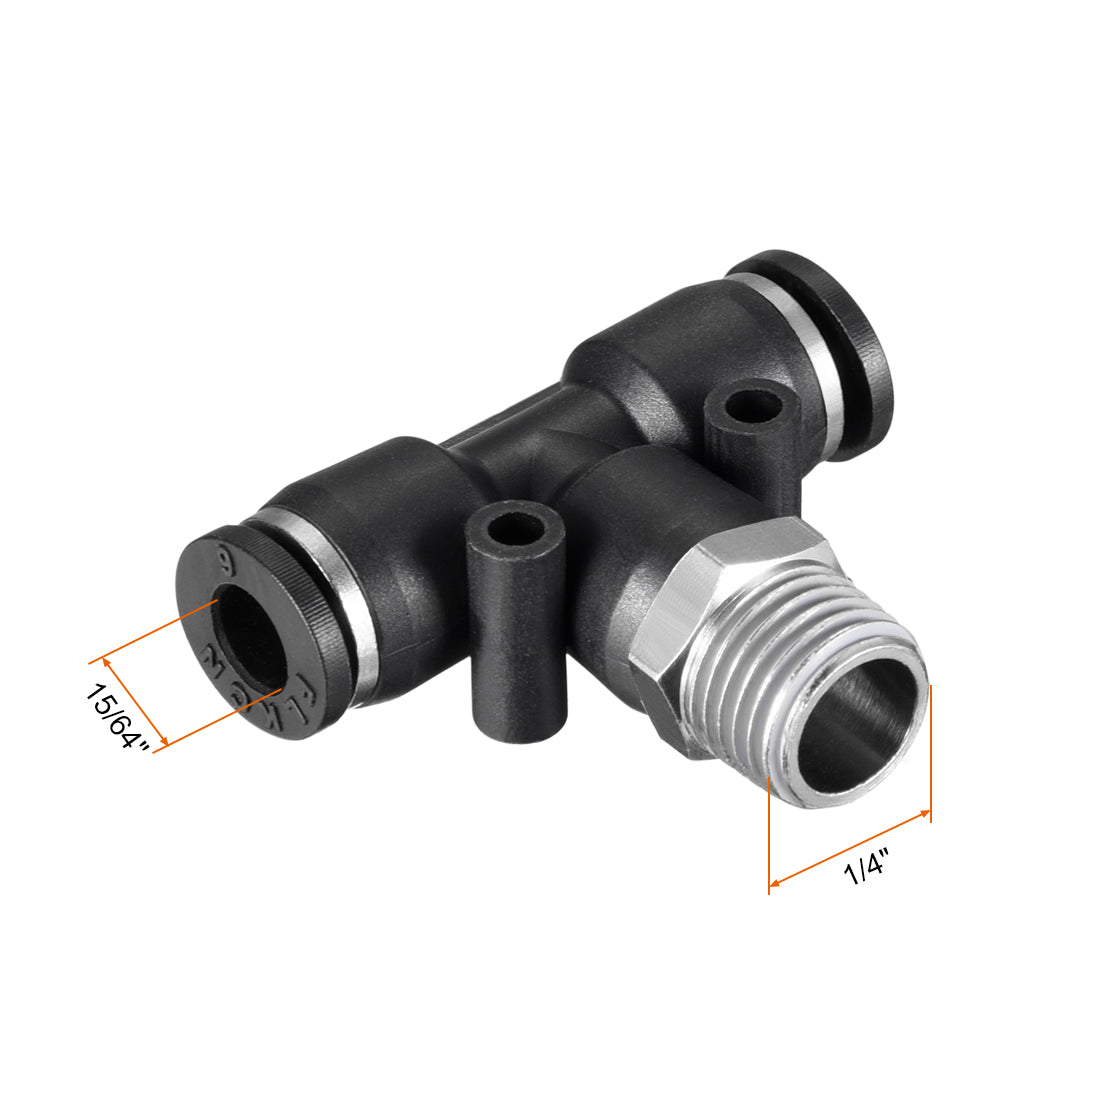 uxcell Uxcell Push to Connect Fittings T Type Thread Tee Tube Connect 15/64" OD x 1/4" PT Male Thread Push Fit Fittings Tube Fittings Push Lock